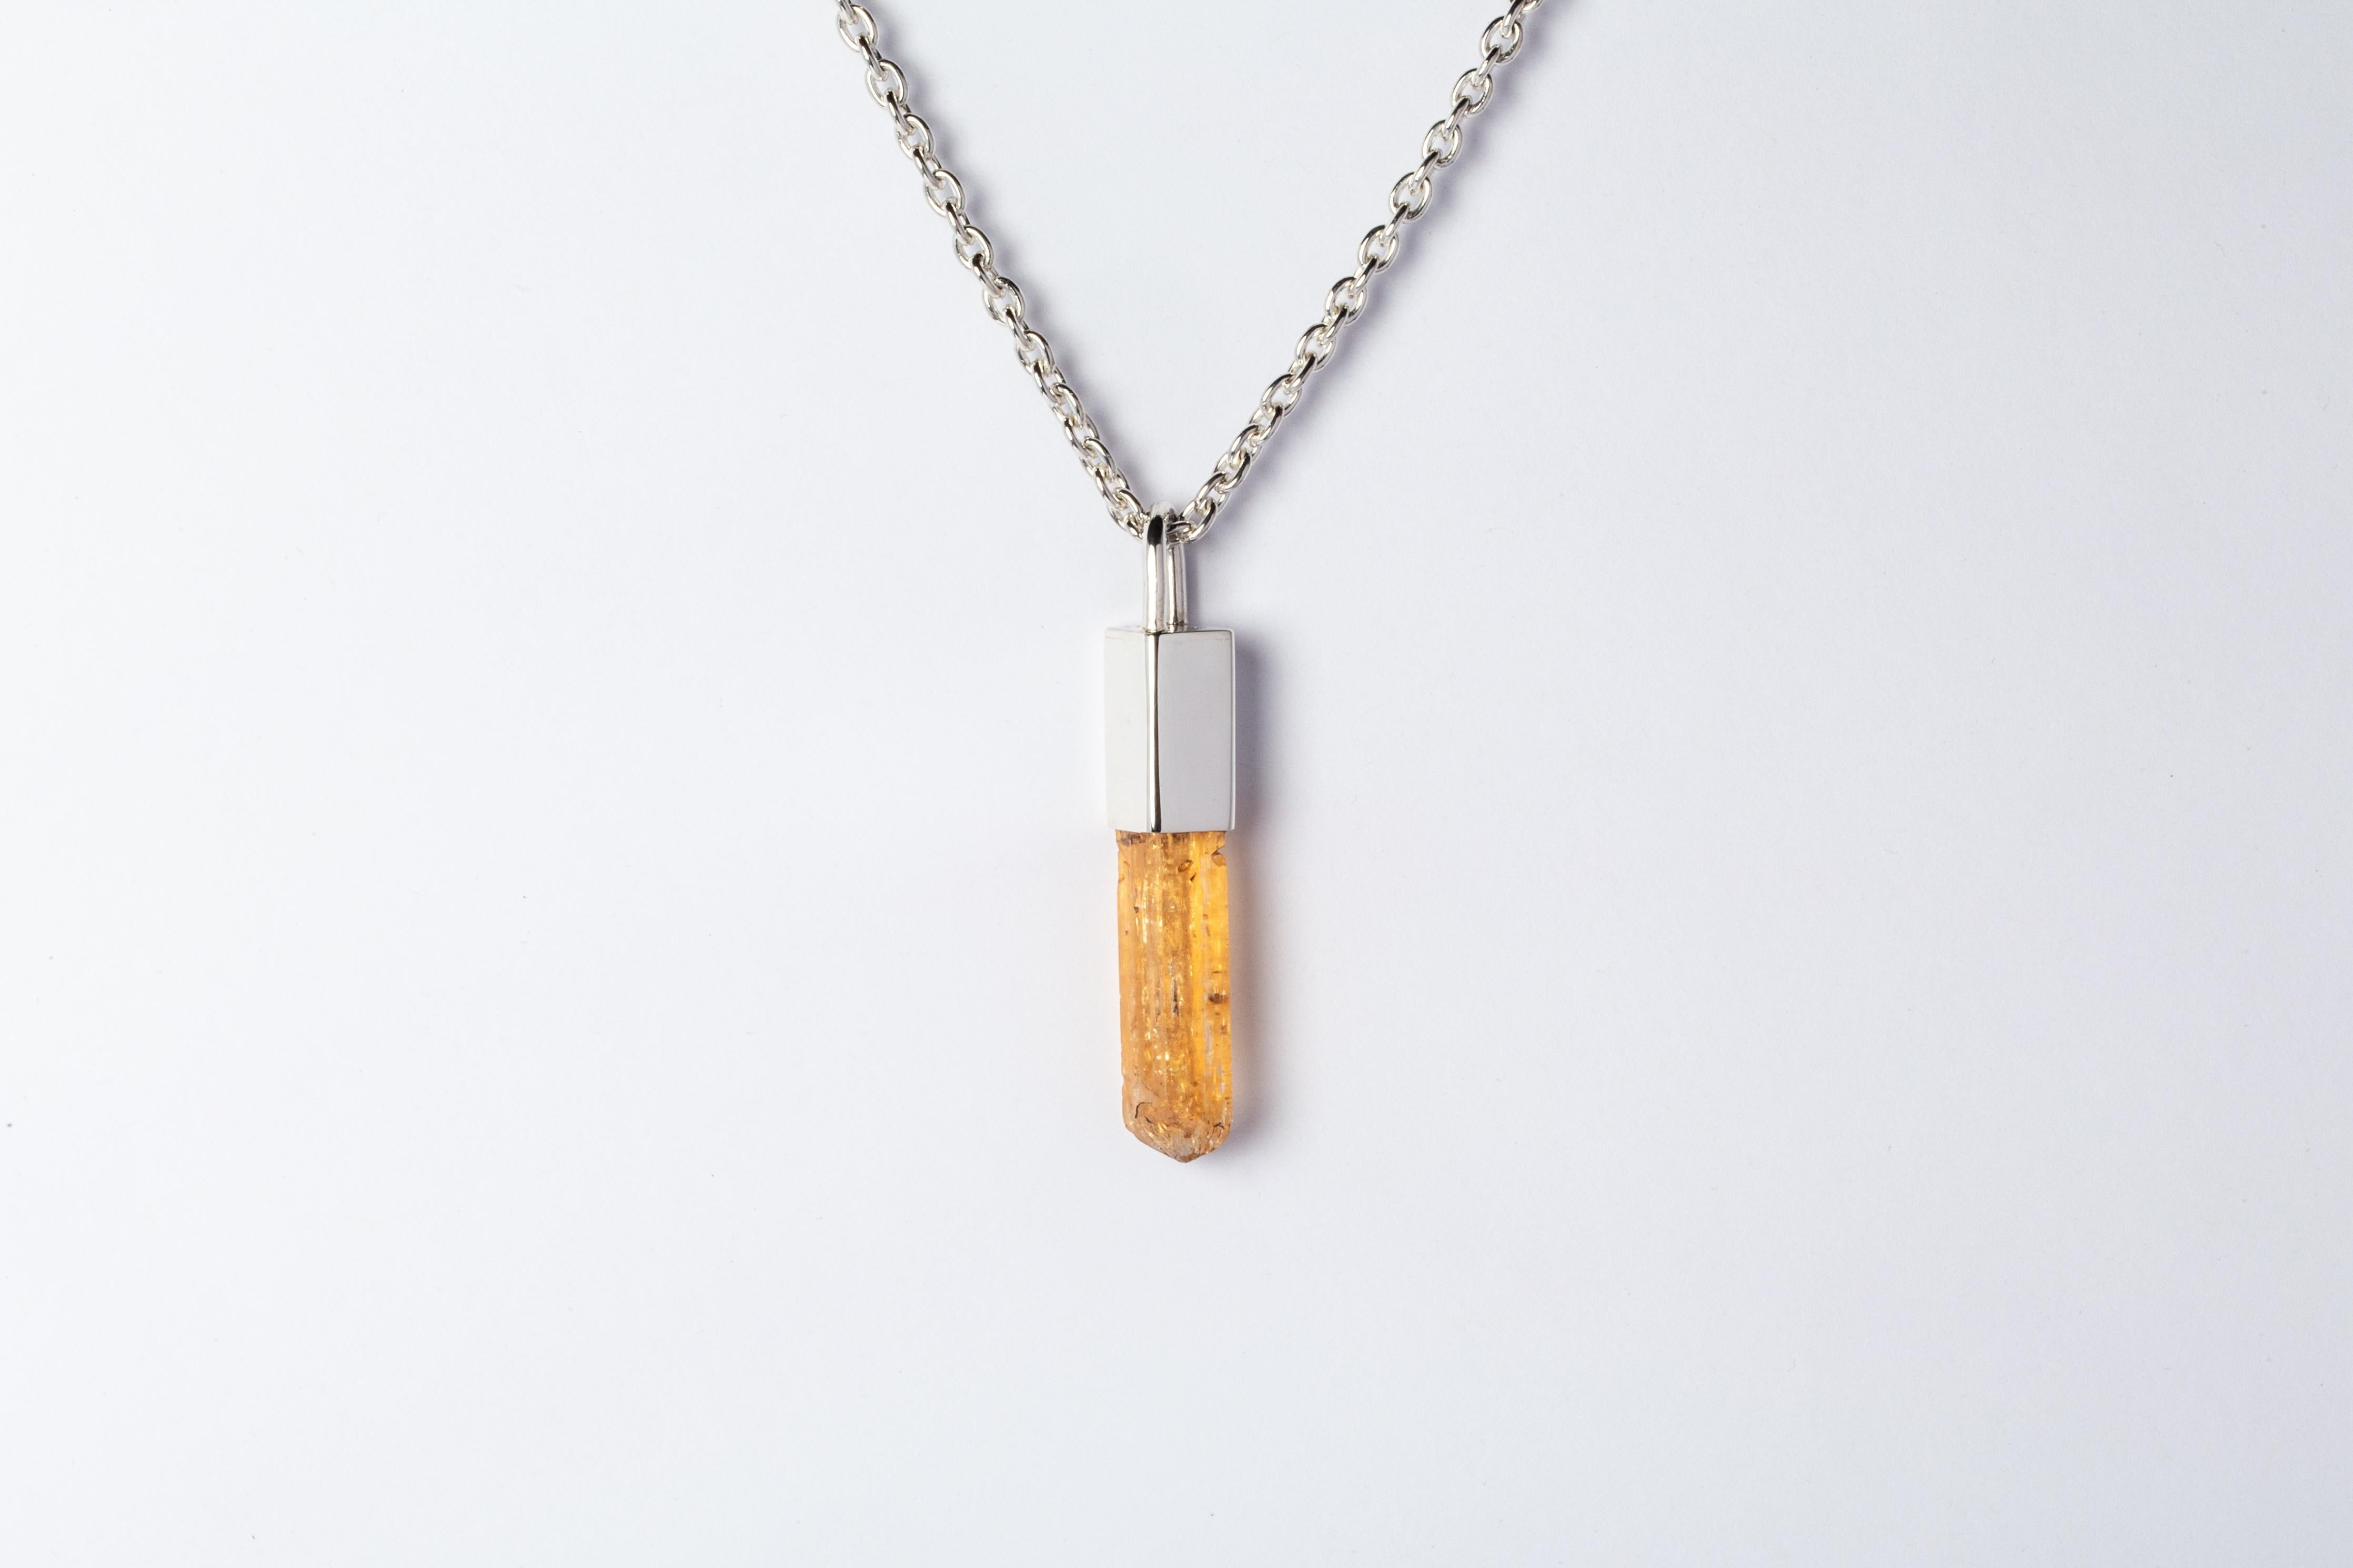 Necklace in polished sterling silver and a rough imperial topaz. The Talisman series is an exploration into the power of natural crystals. The crystals used in these pieces are discovered through adventure and are hand selected. Each piece is unique